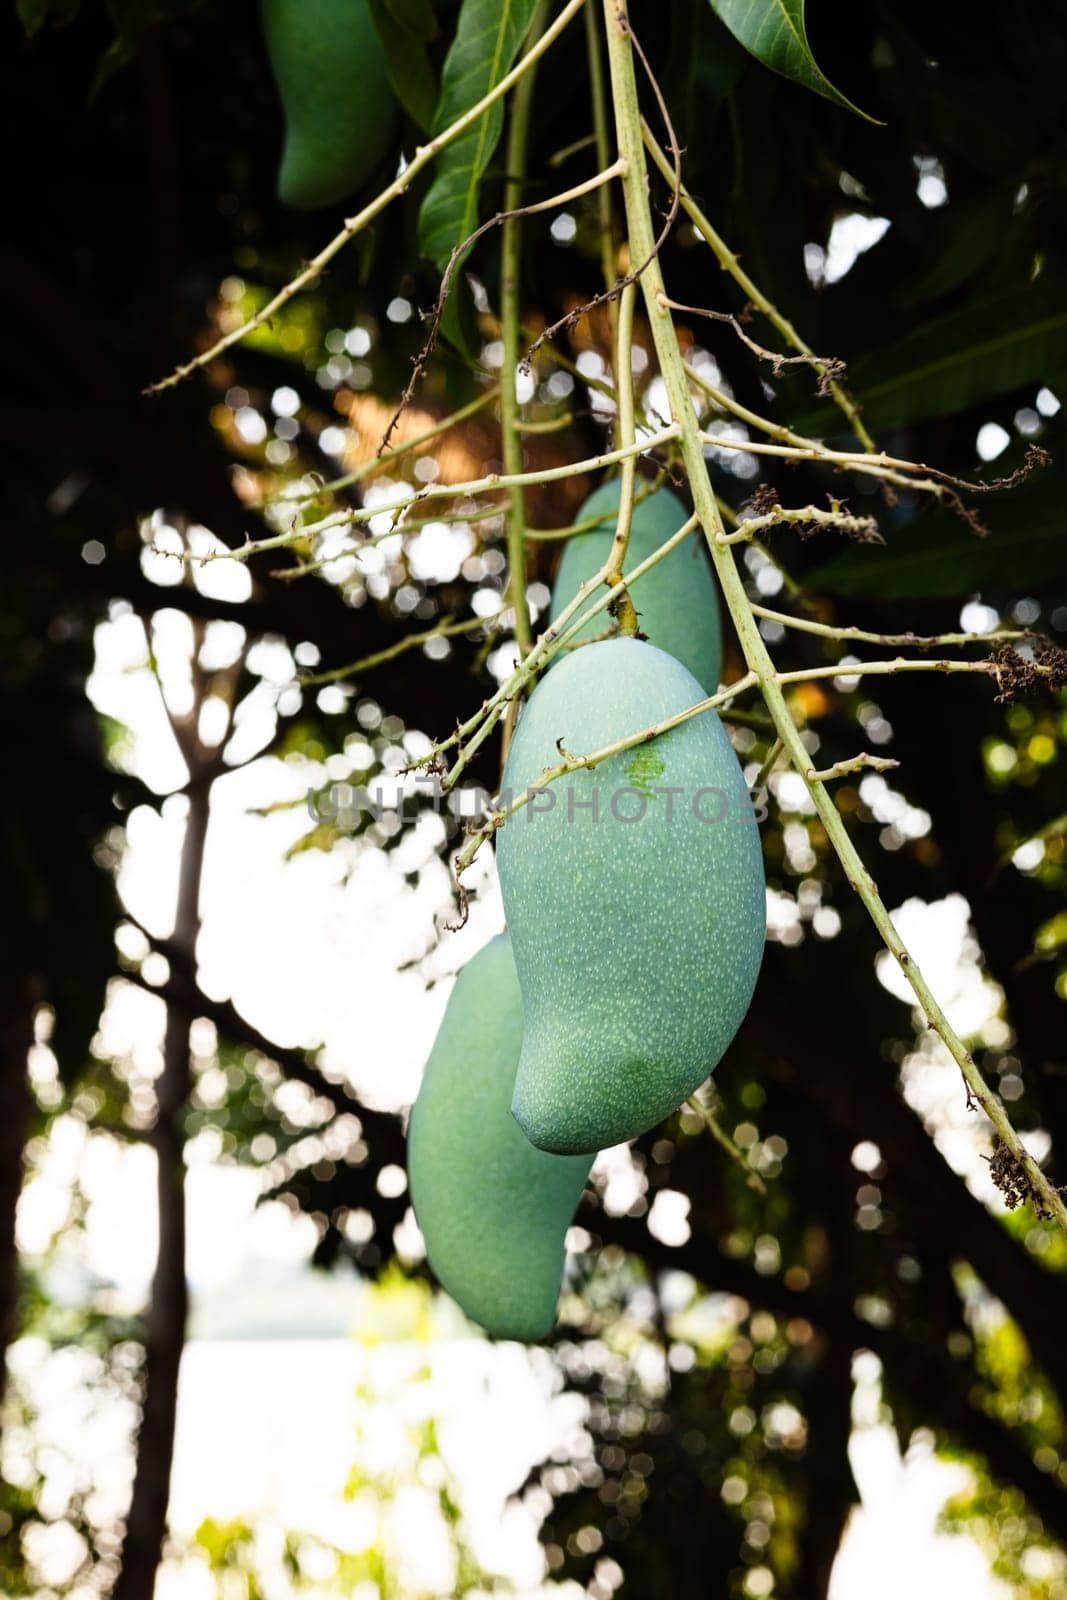 Close Up Of Tree With Green Mango Fruit In The Garden by urzine